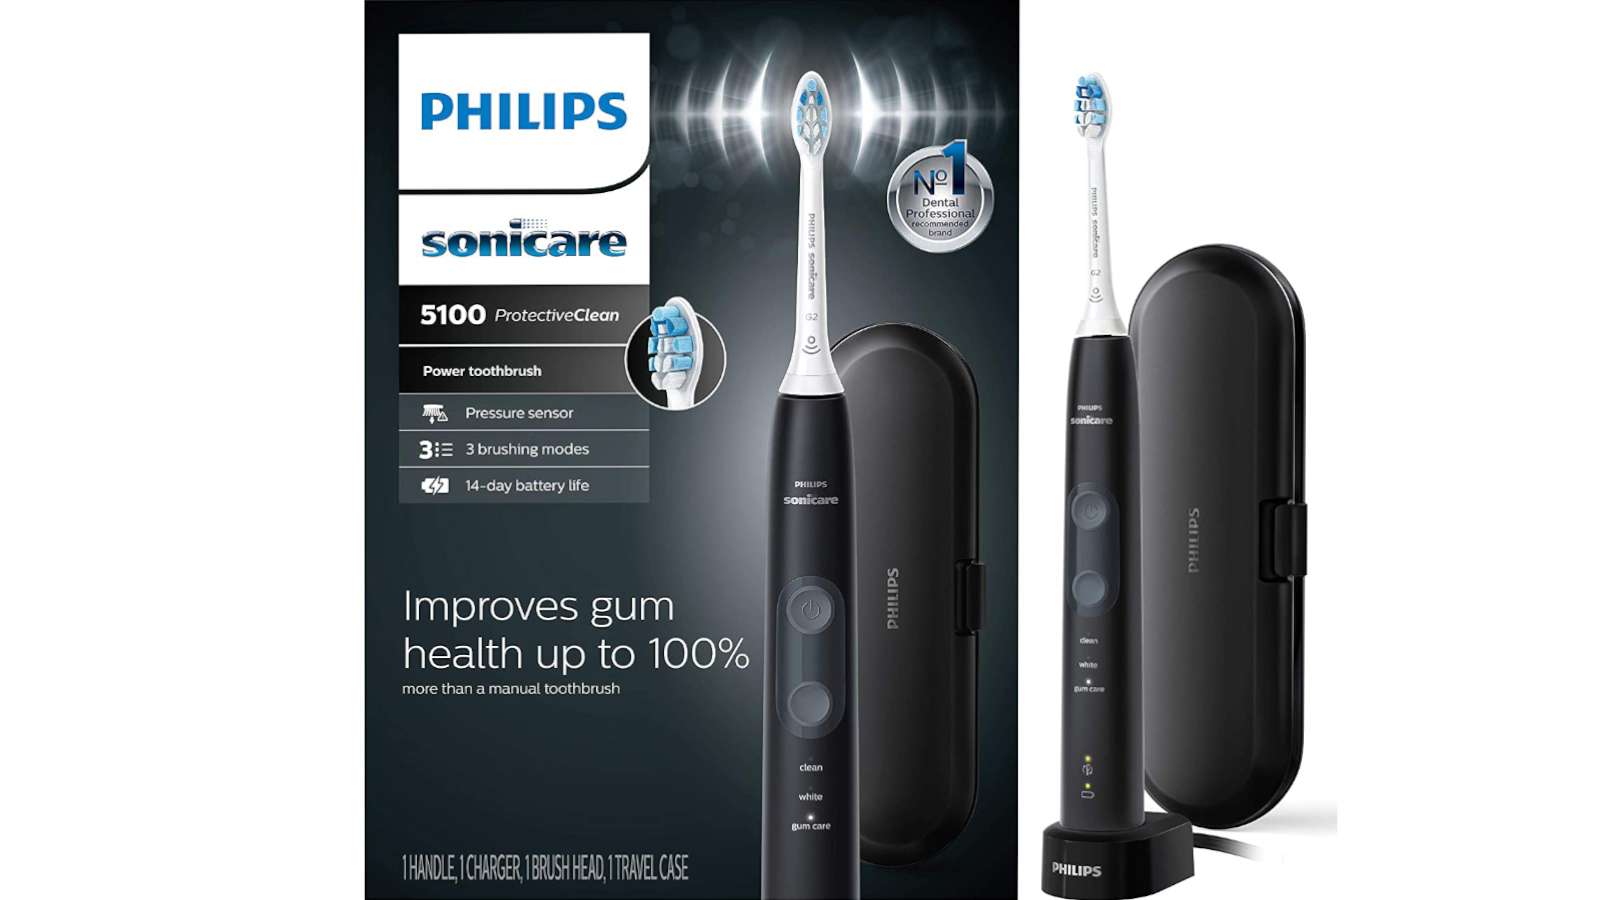 Philips Sonicare ProtectiveClean 5100 (Black, HX6850/60) toothbrush and its packaging